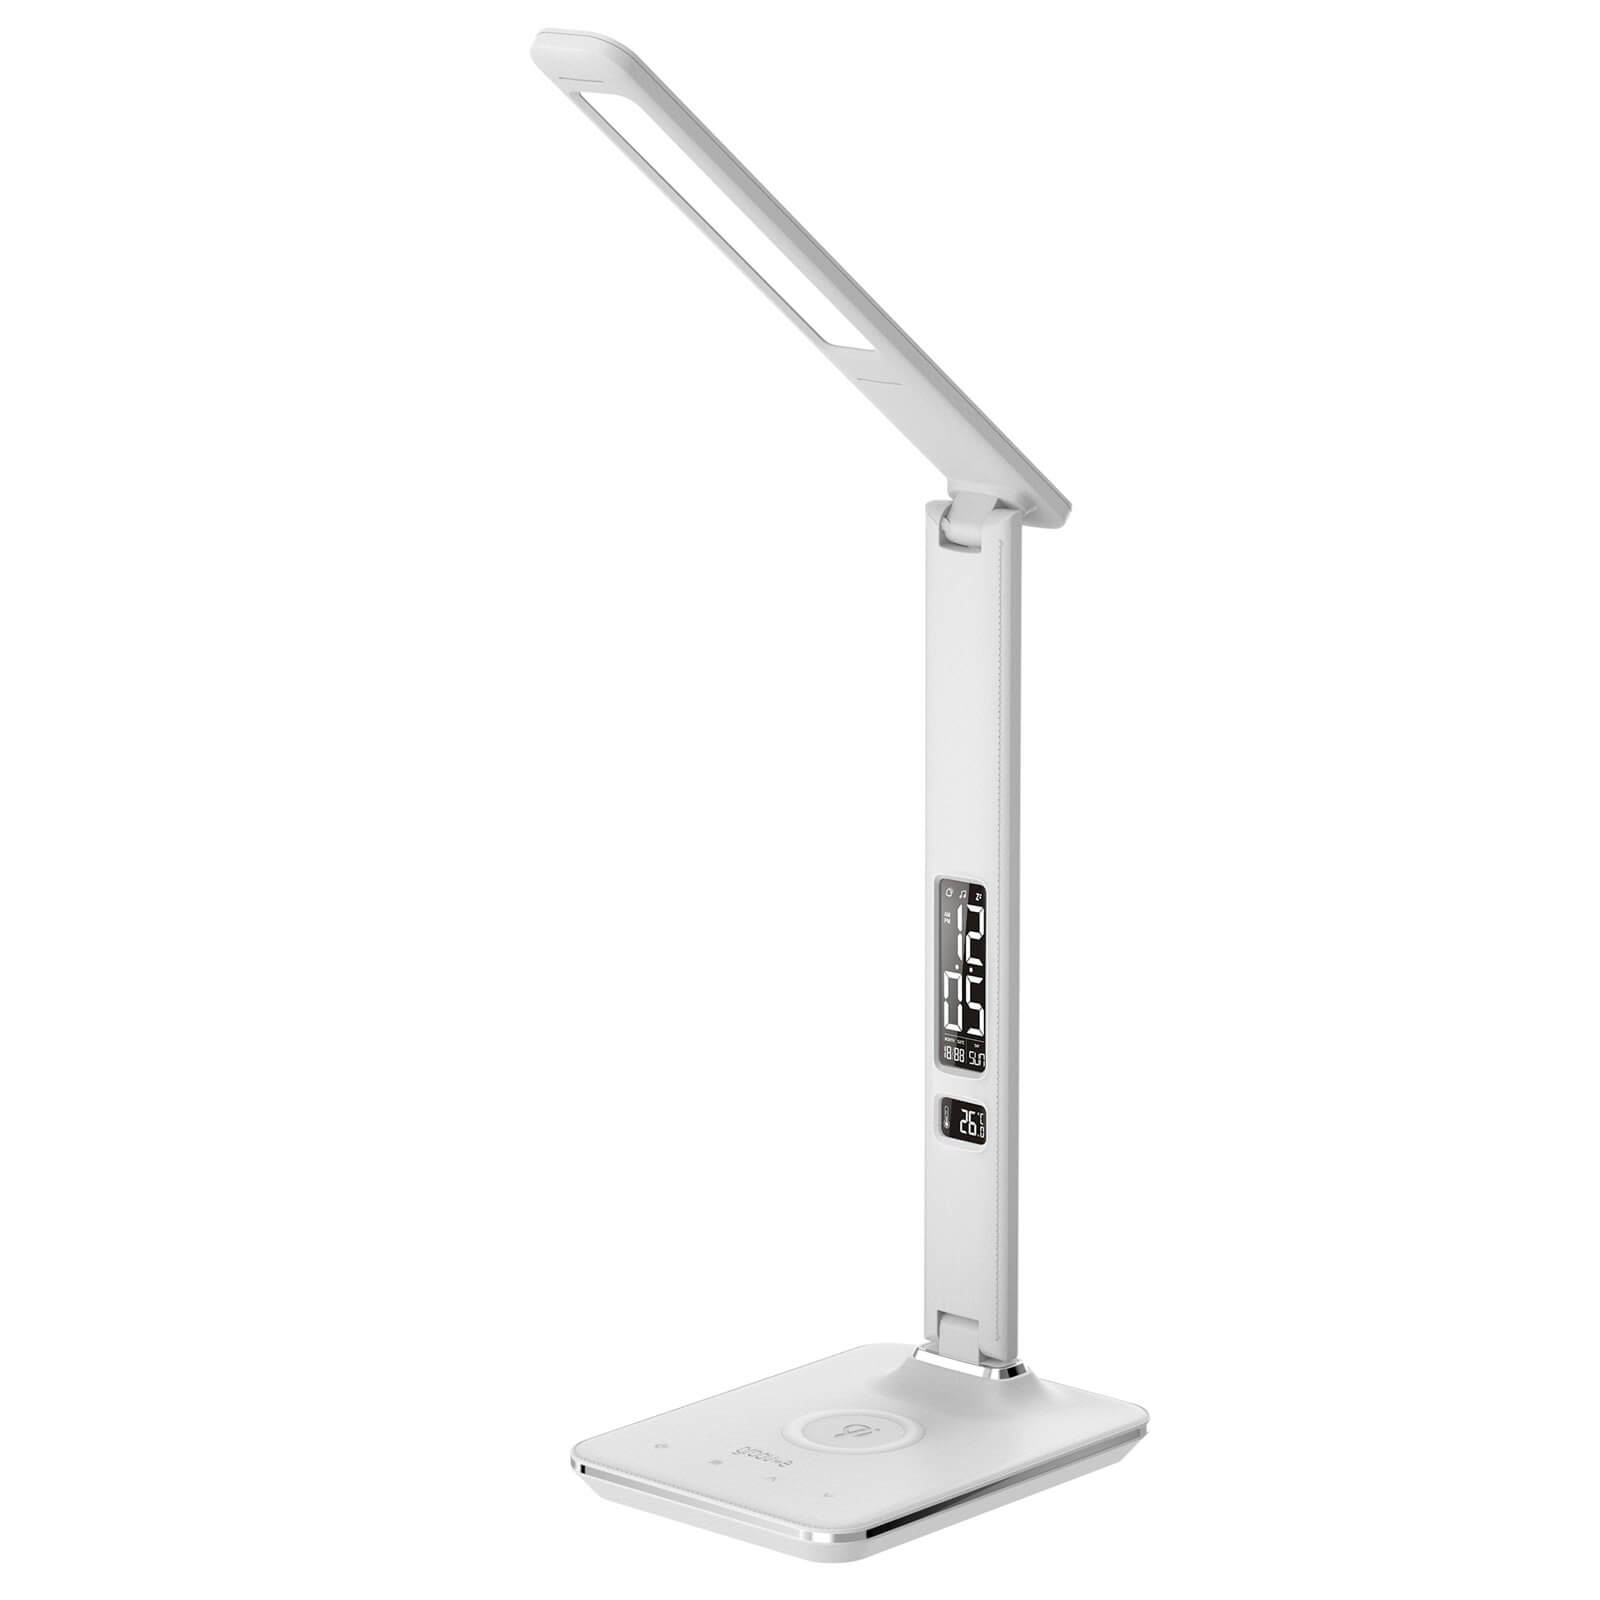 Groov-E Ares LED Desk Lamp Alarm Clock - with Wireless Charging Pad - White